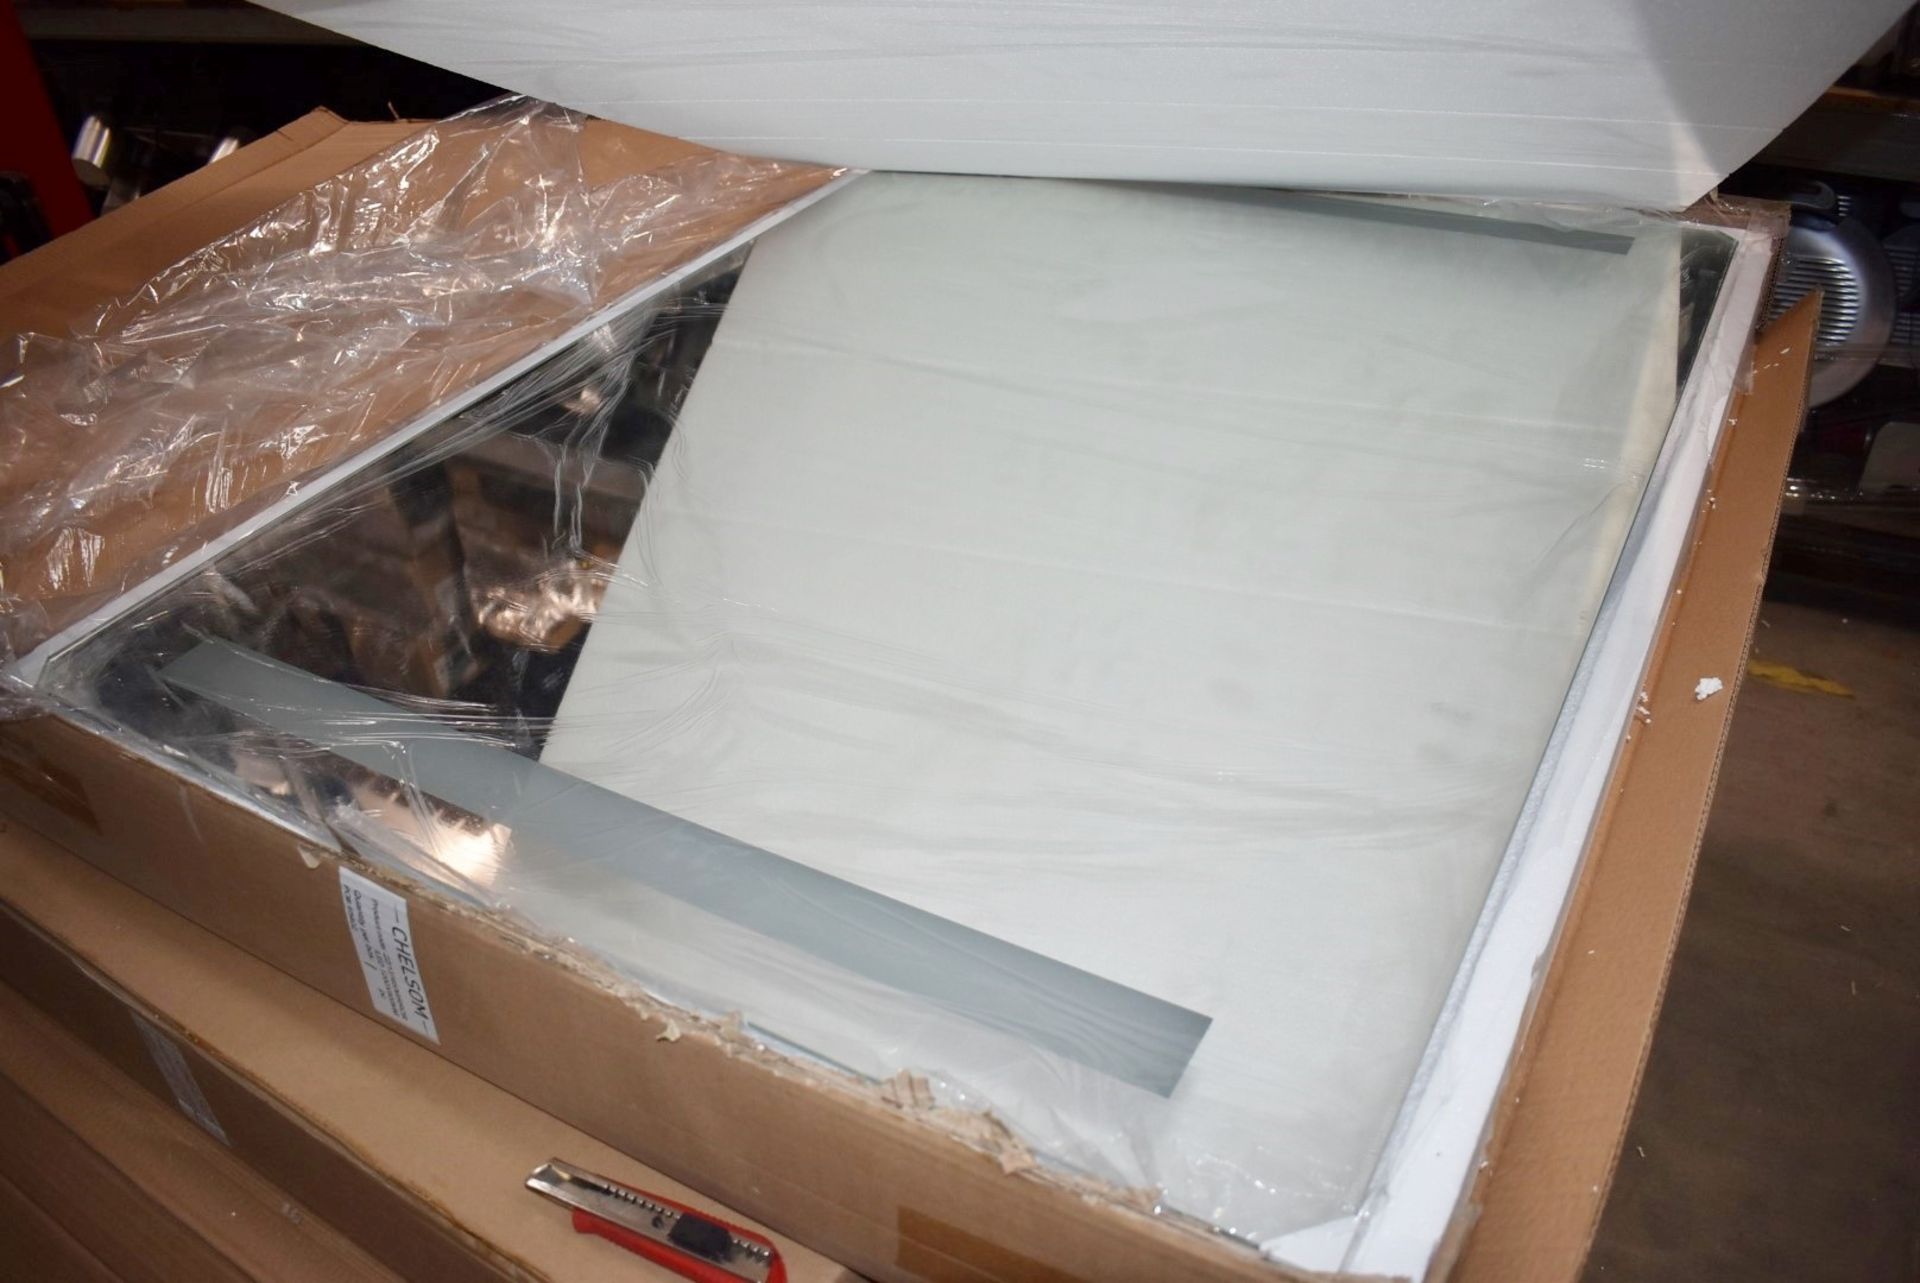 1 x Chelsom Large Illuminated LED Bathroom Mirror With Demister - Brand New Stock - As Used in Major - Image 12 of 14